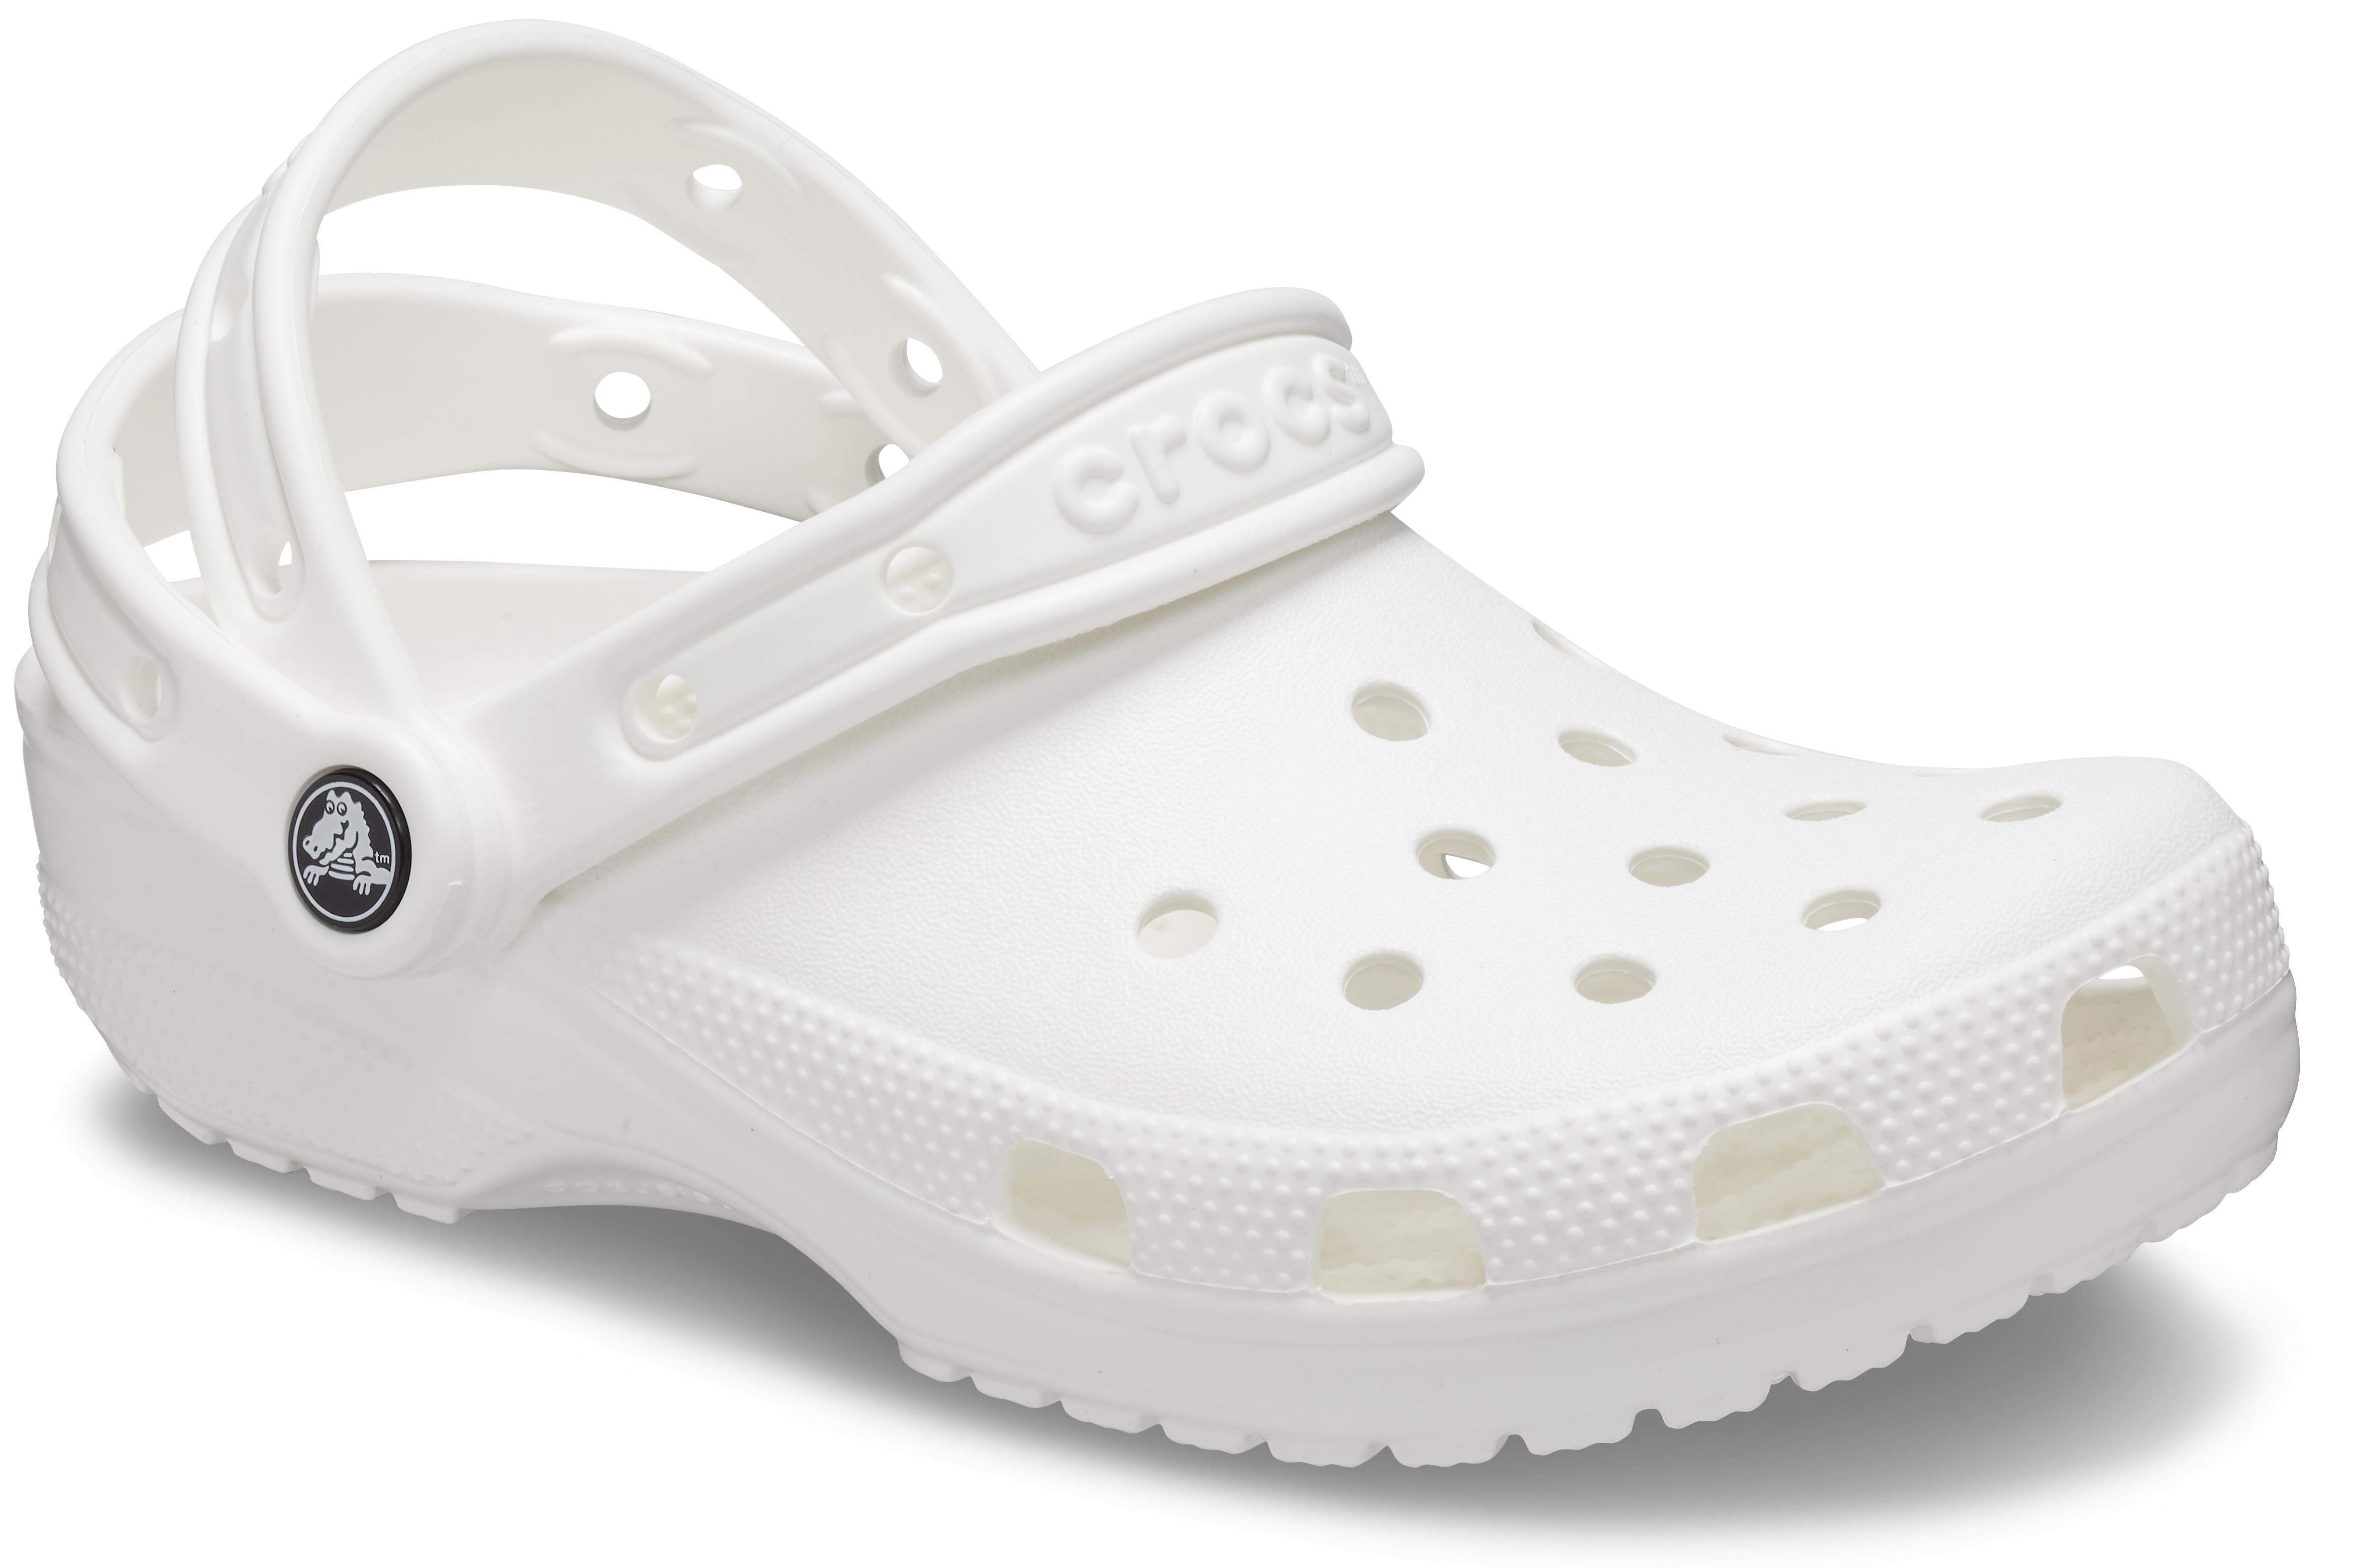 crocs with two straps